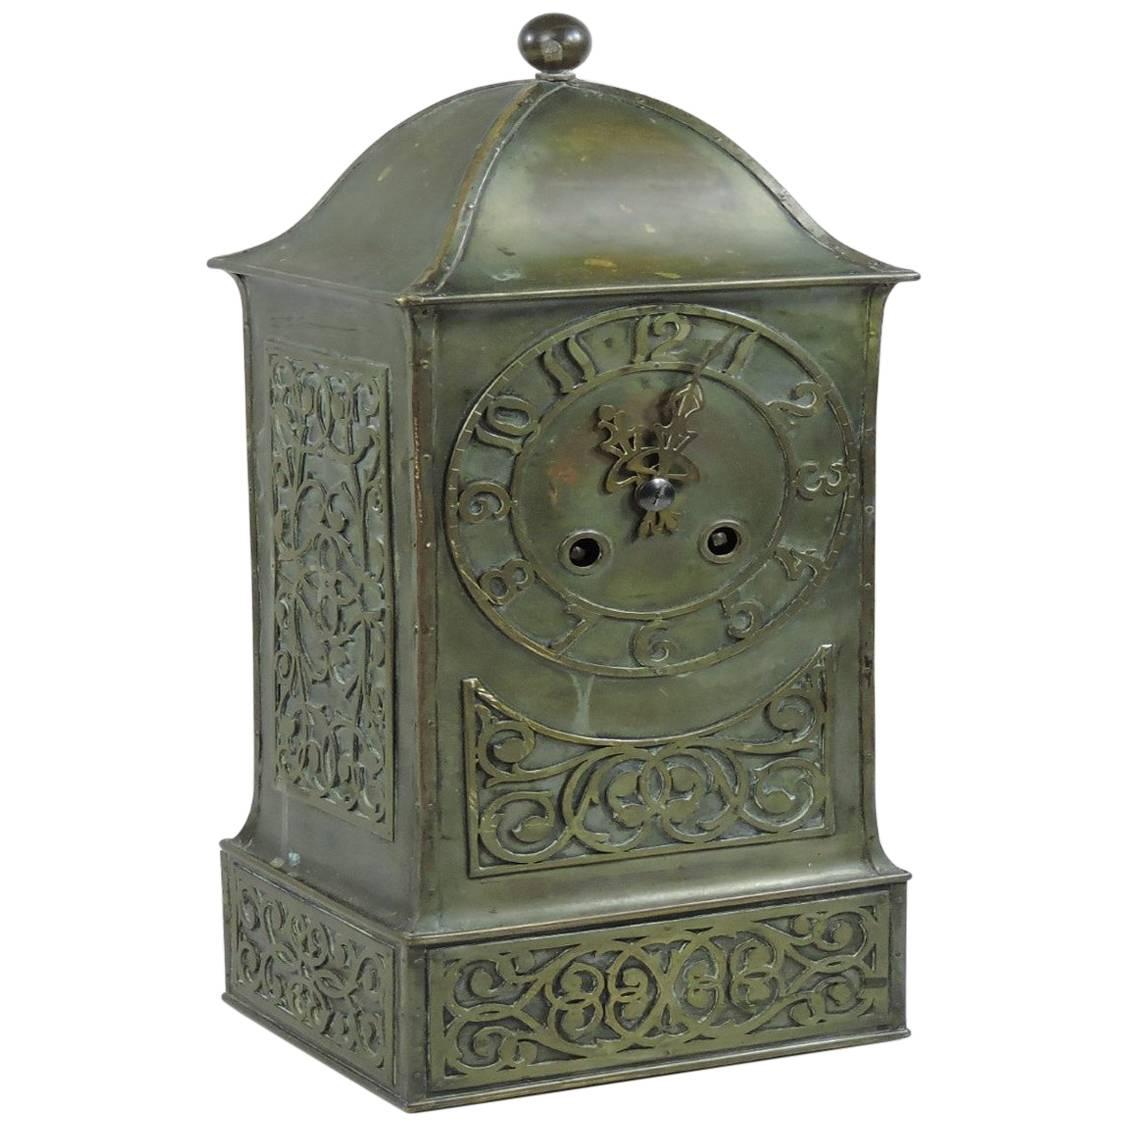 B G H, Attri an Arts & Crafts Brass Mantel Clock with Stylised Floral Chasing For Sale